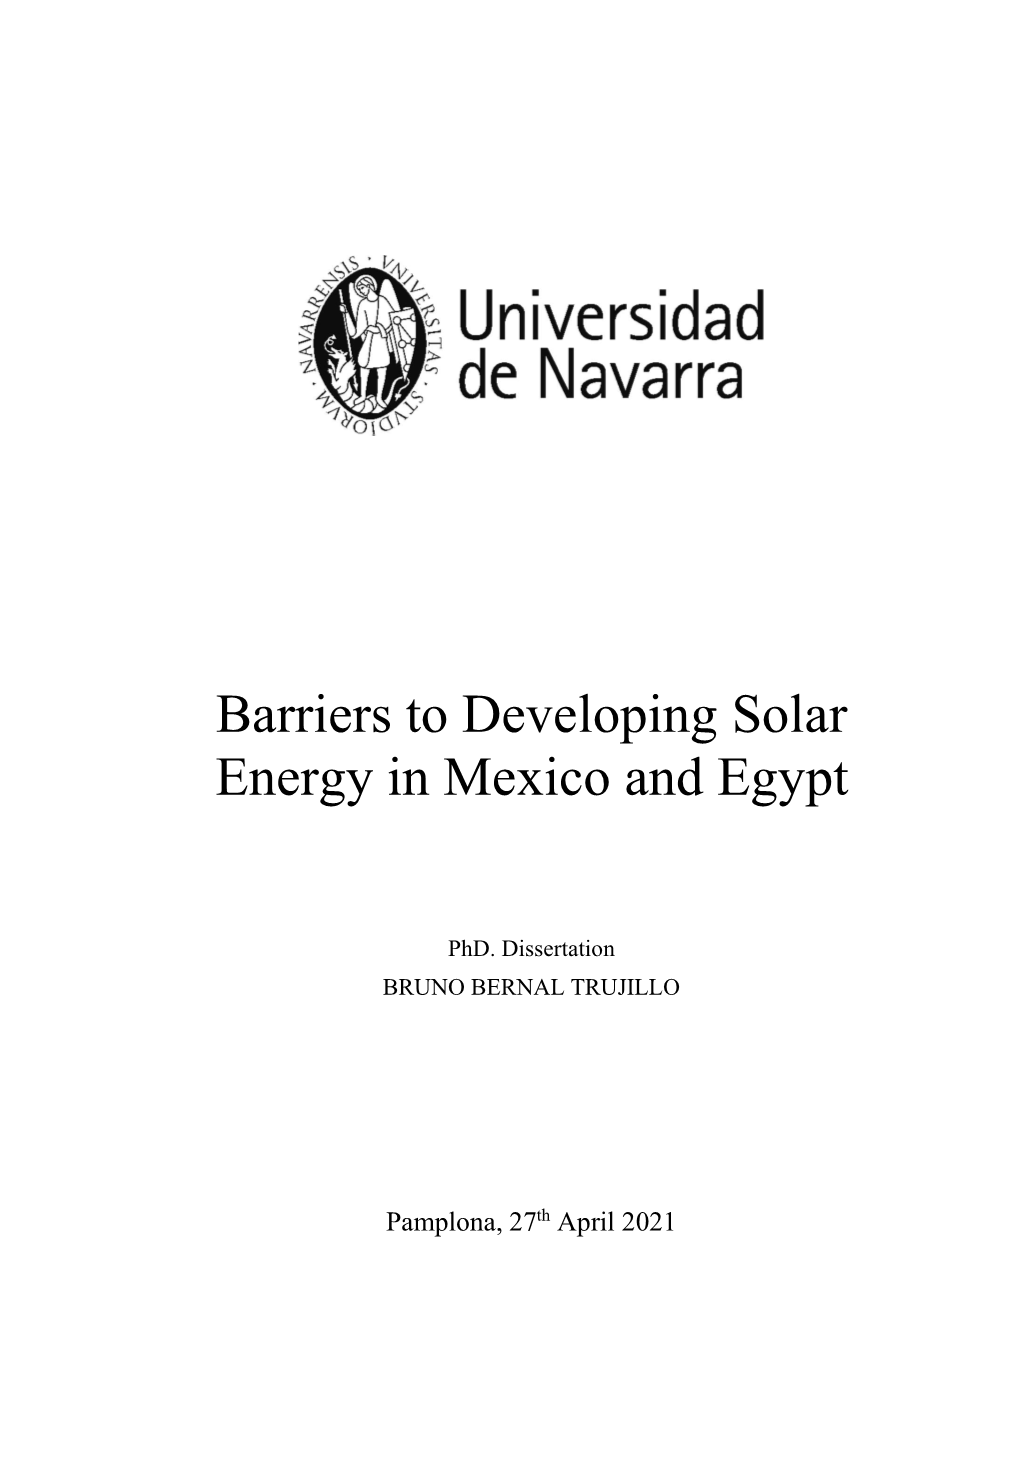 Barriers to Developing Solar Energy in Mexico and Egypt